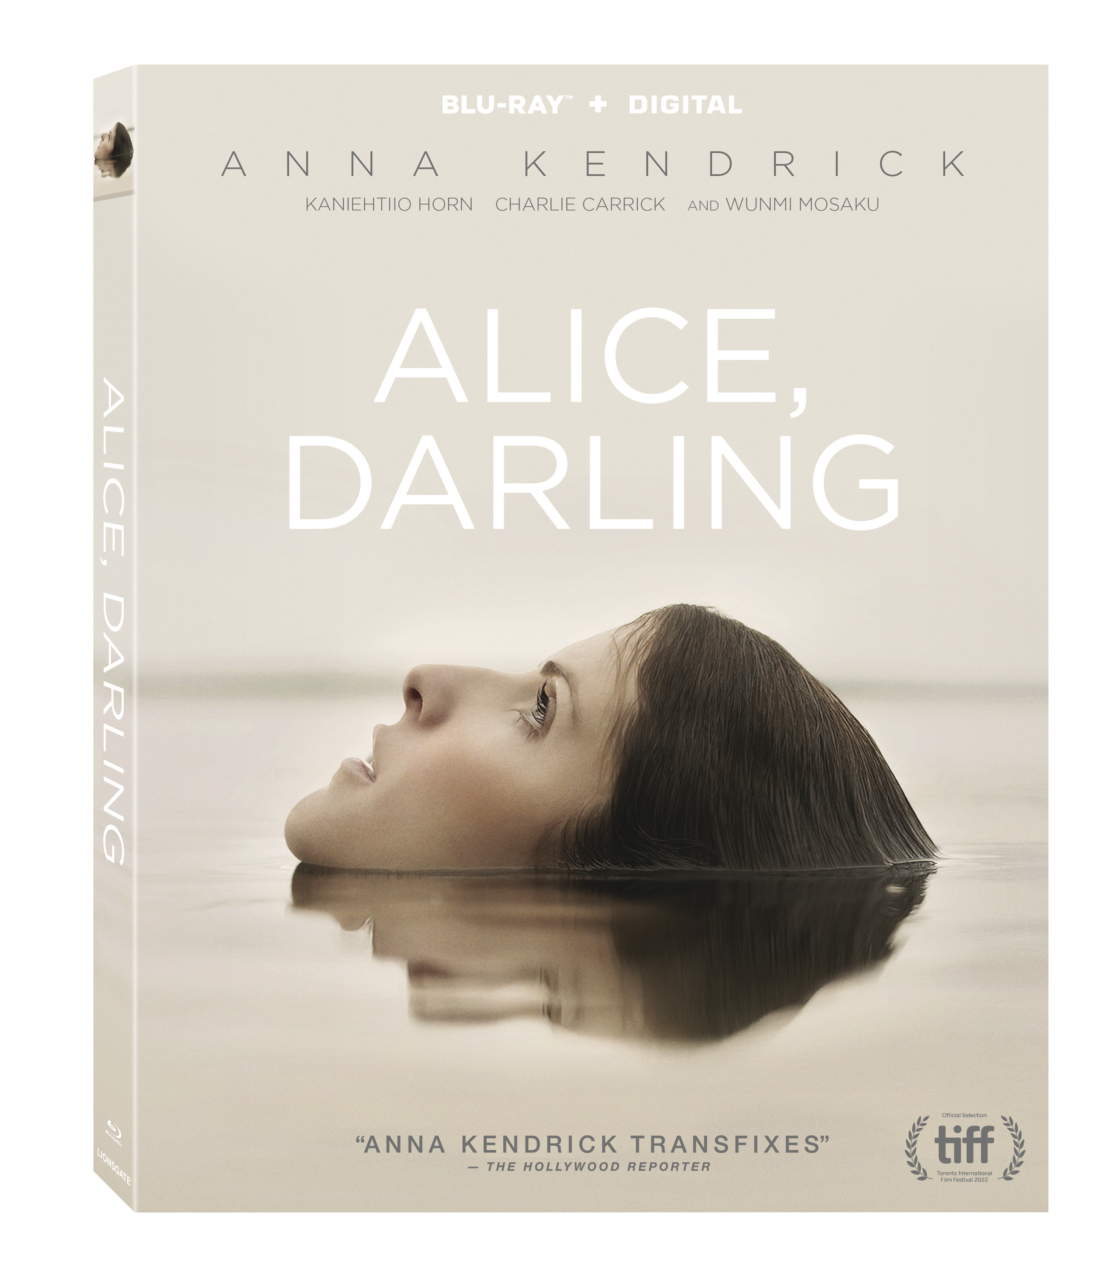 Alice, Darling Blu-Ray Combo Pack cover (Liosngate)